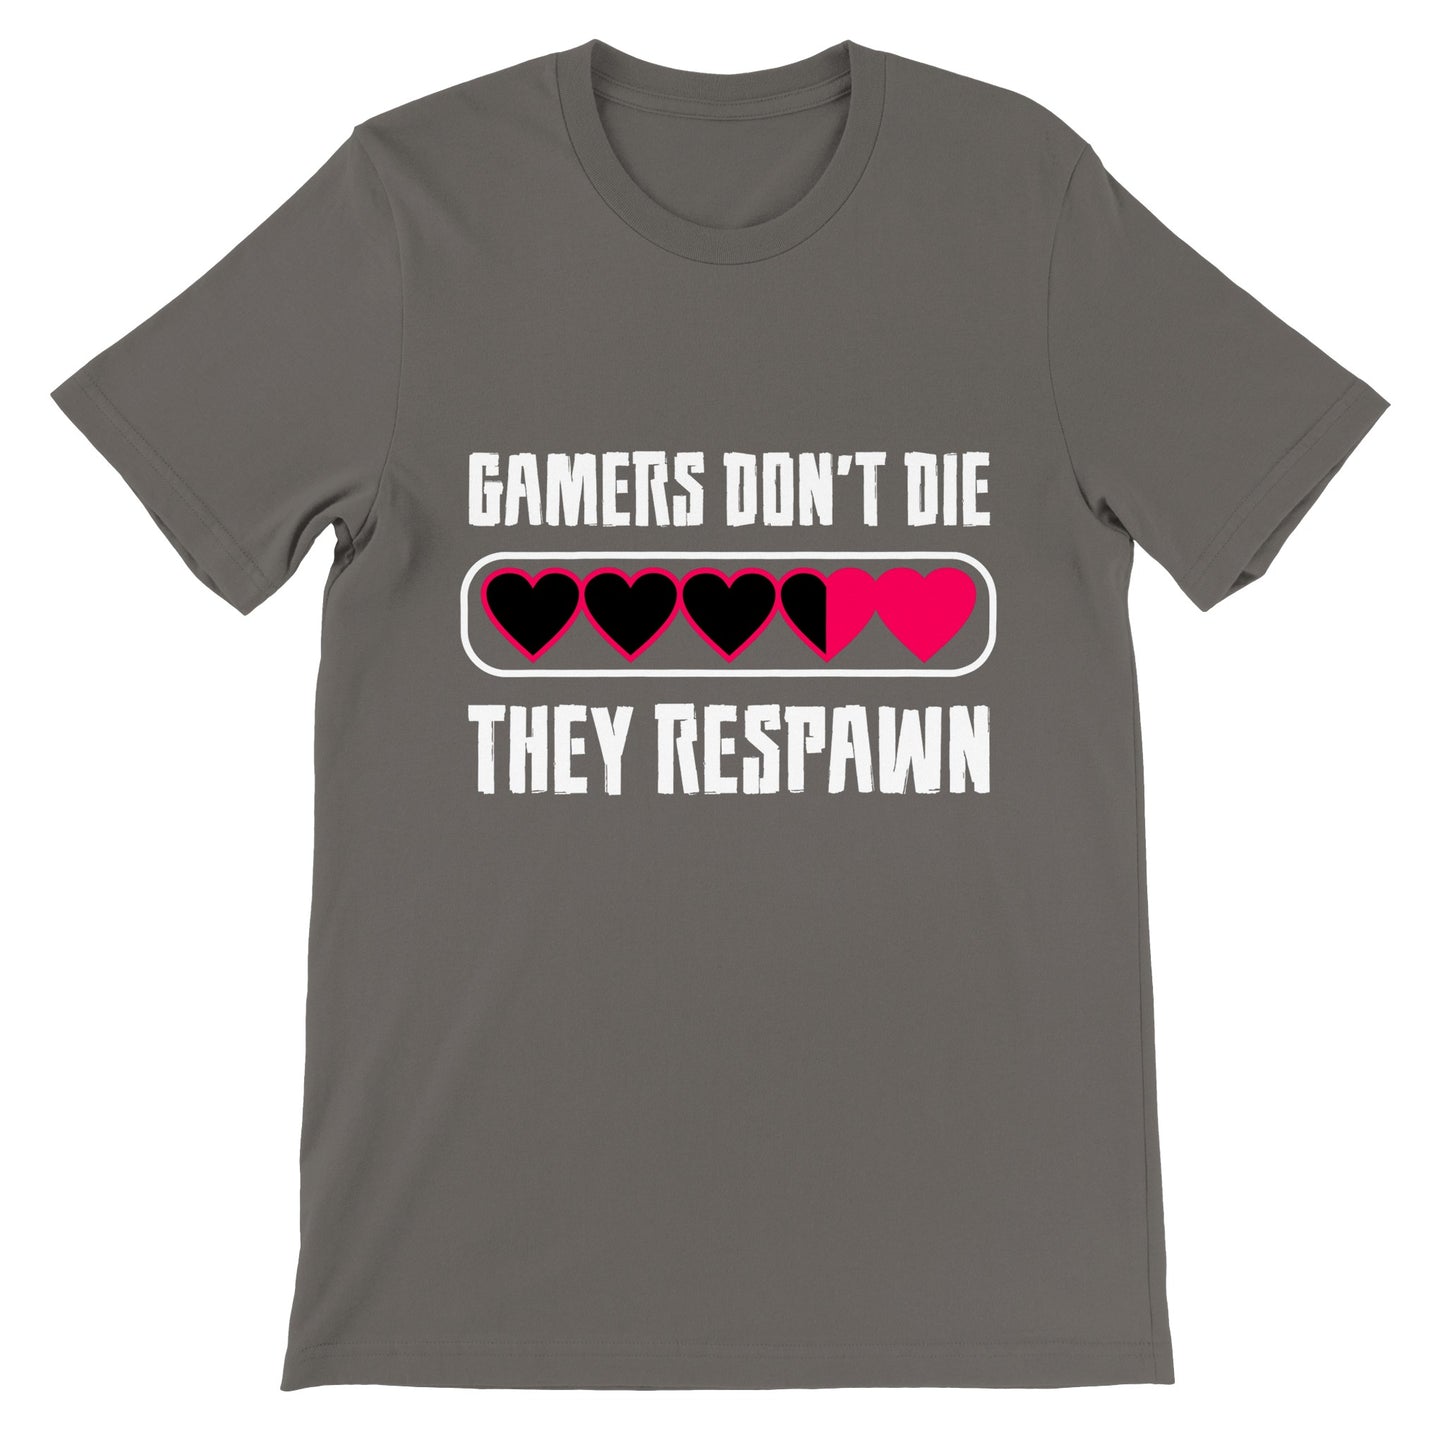 Gaming T-shirts - Gamers Dont Die They Respawn - Premium Unisex T-shirt